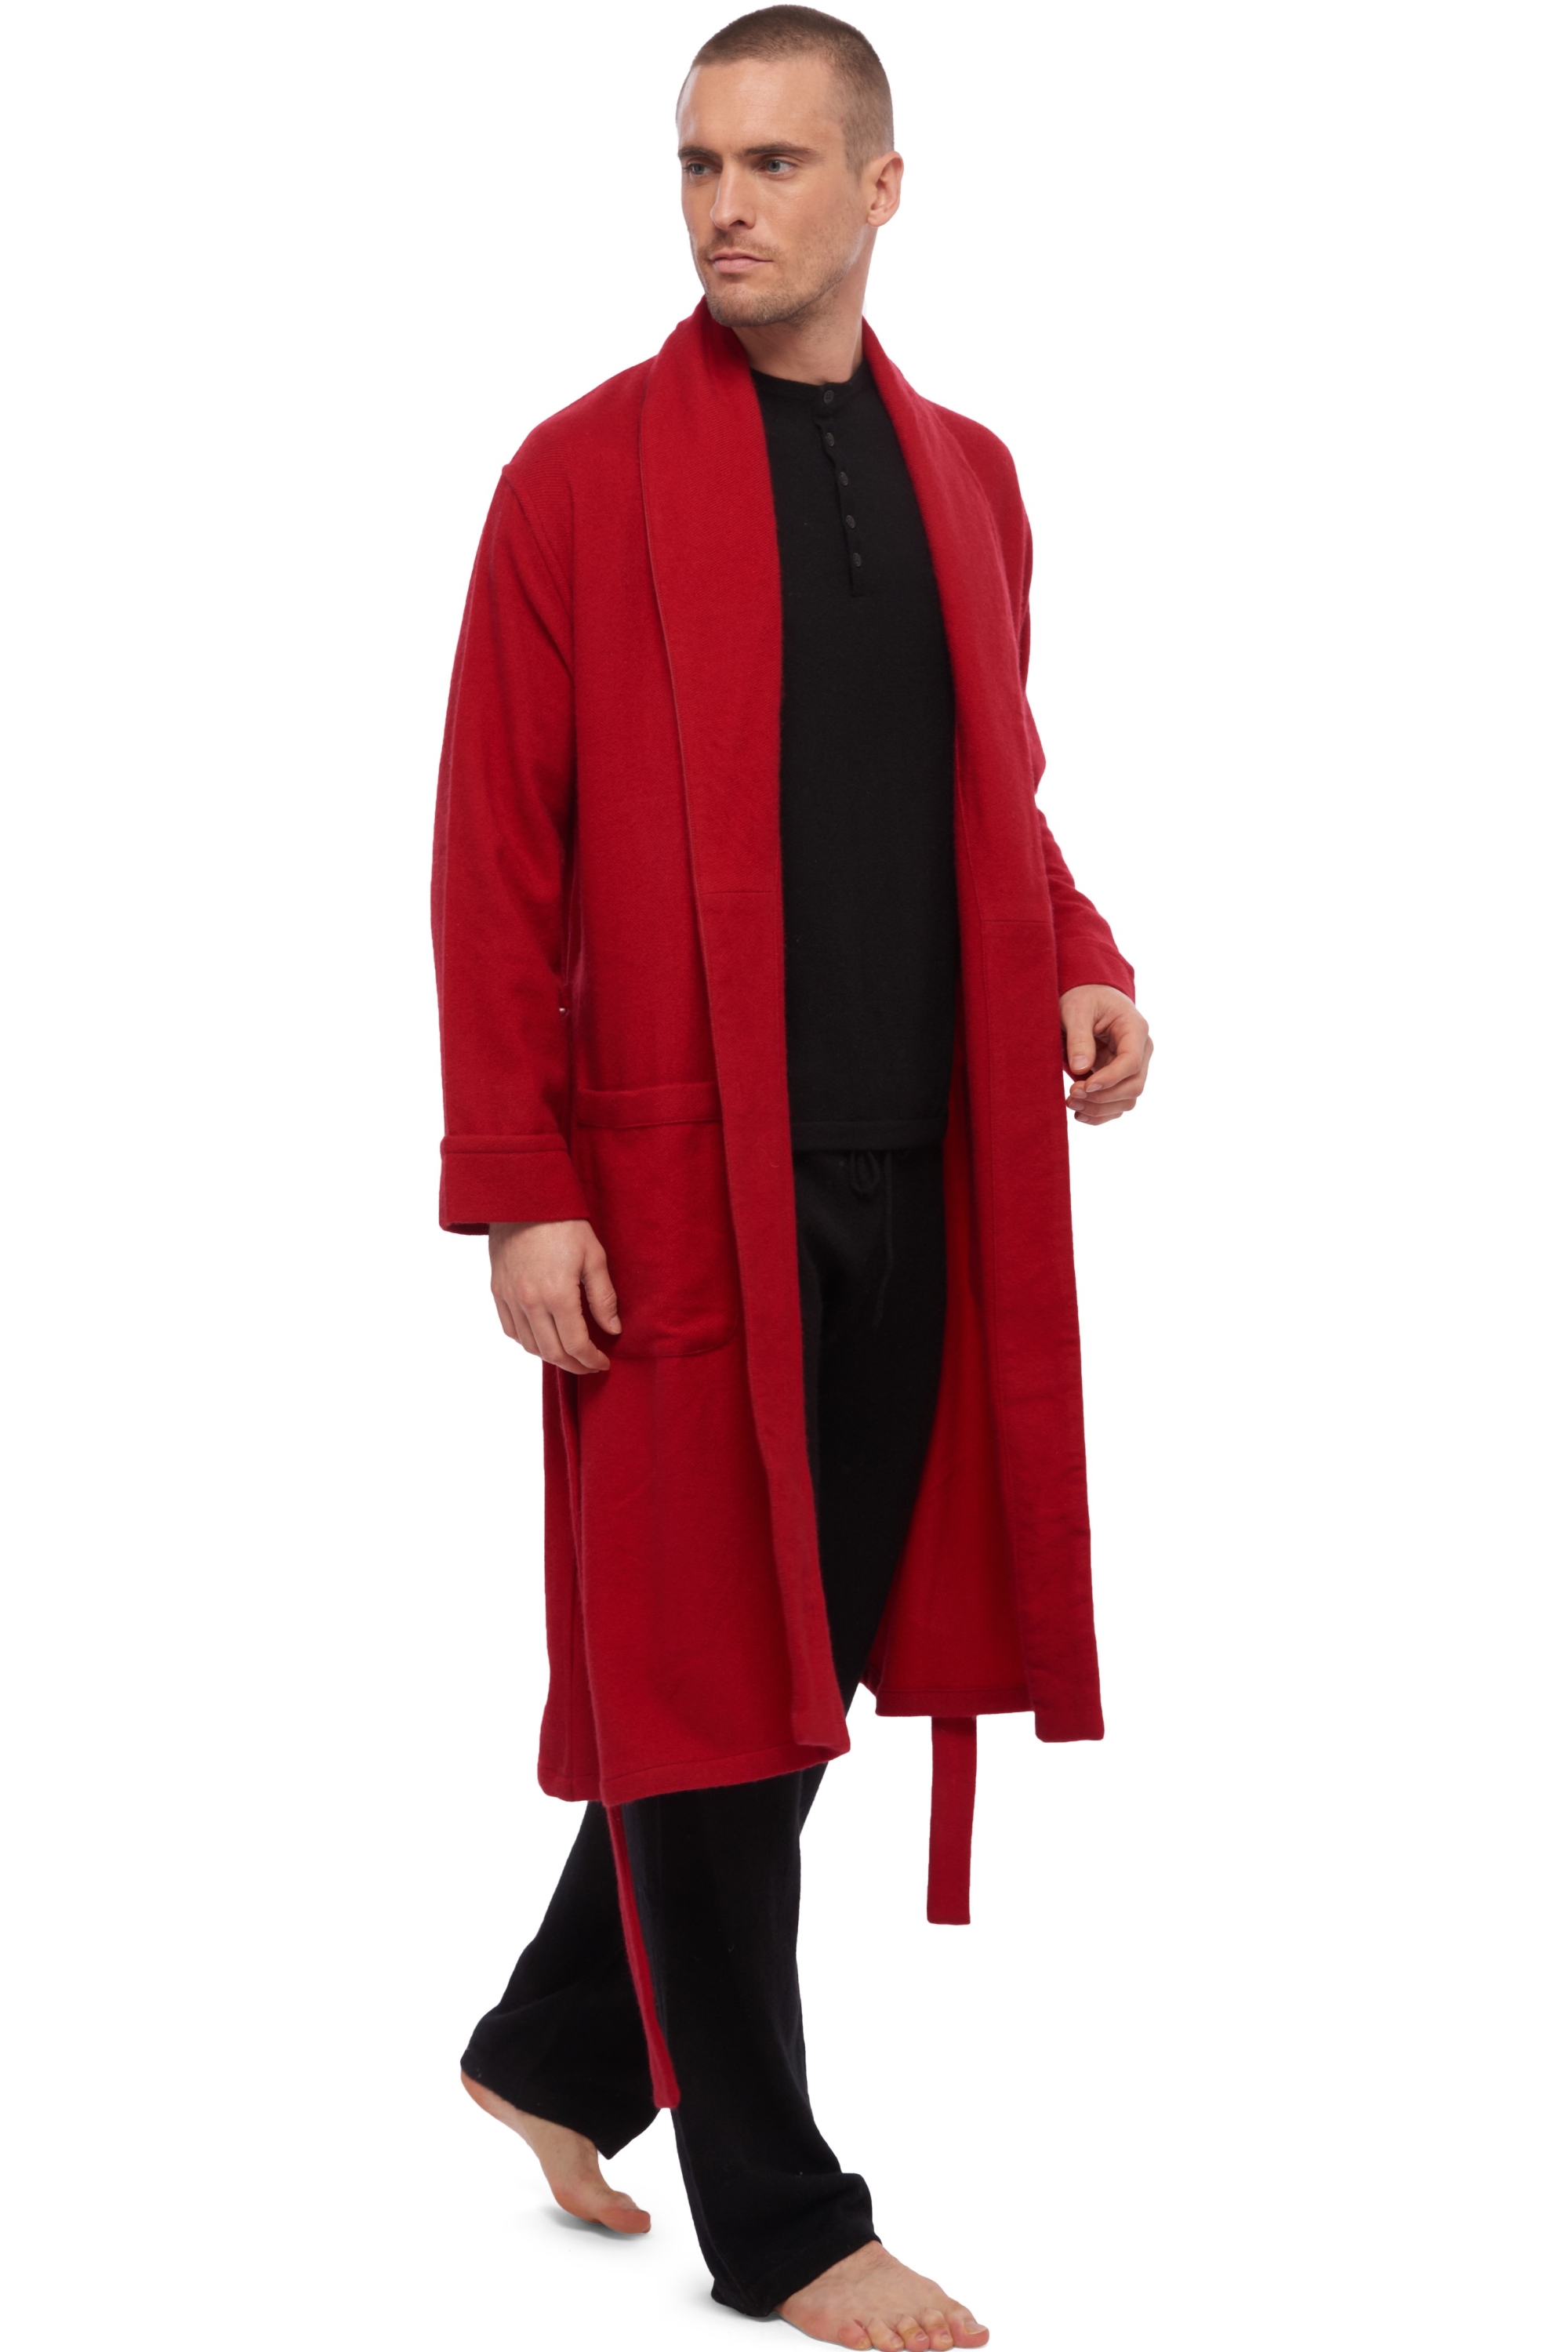 Cachemire interieur homme working rouge profond t3